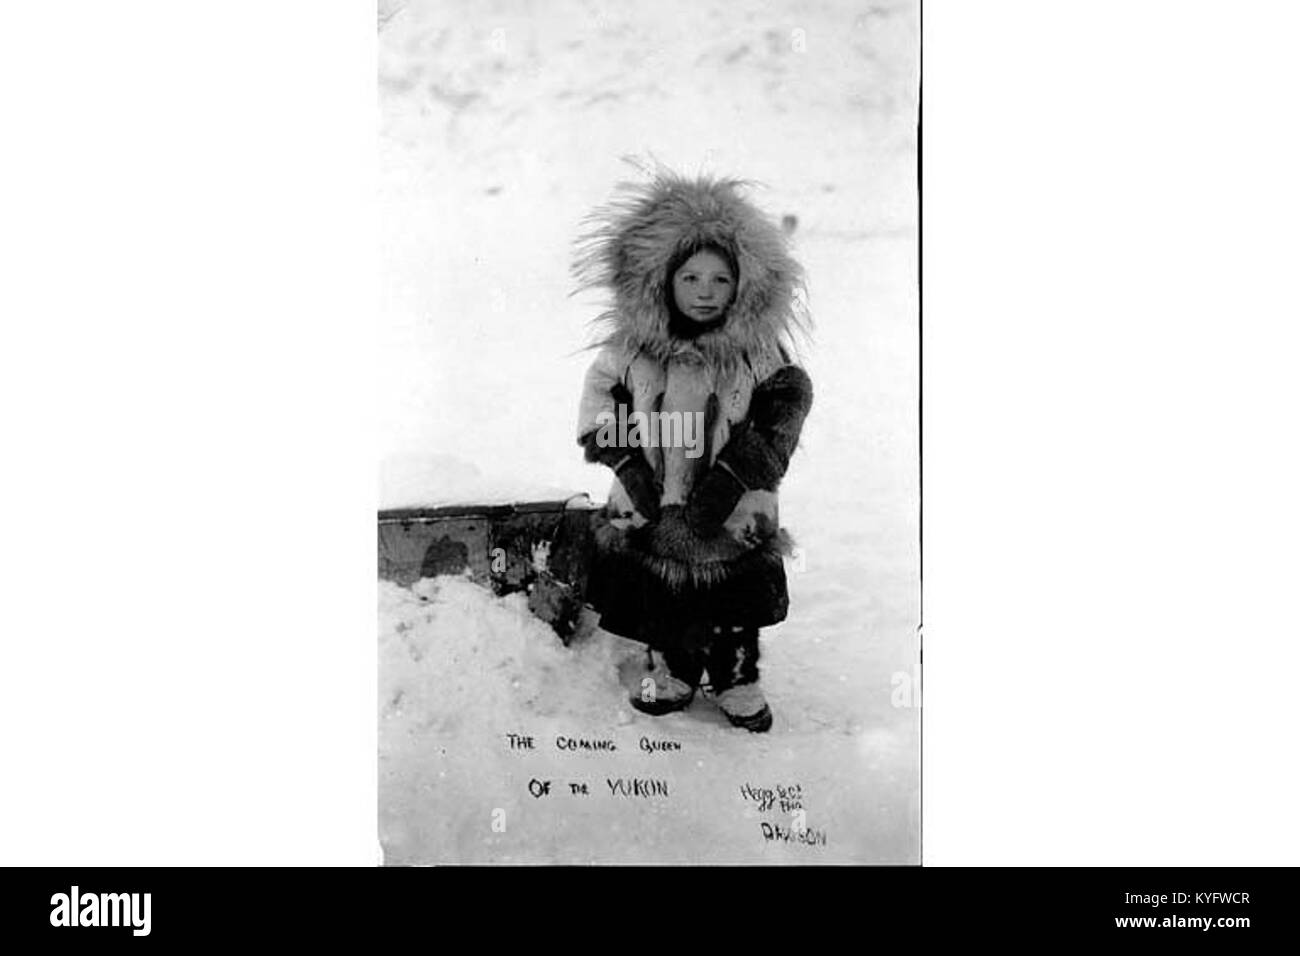 Young Indian girl wearing fur parka and mukluks, probably Yukon Territory, ca 1899 (HEGG 261) Stock Photo